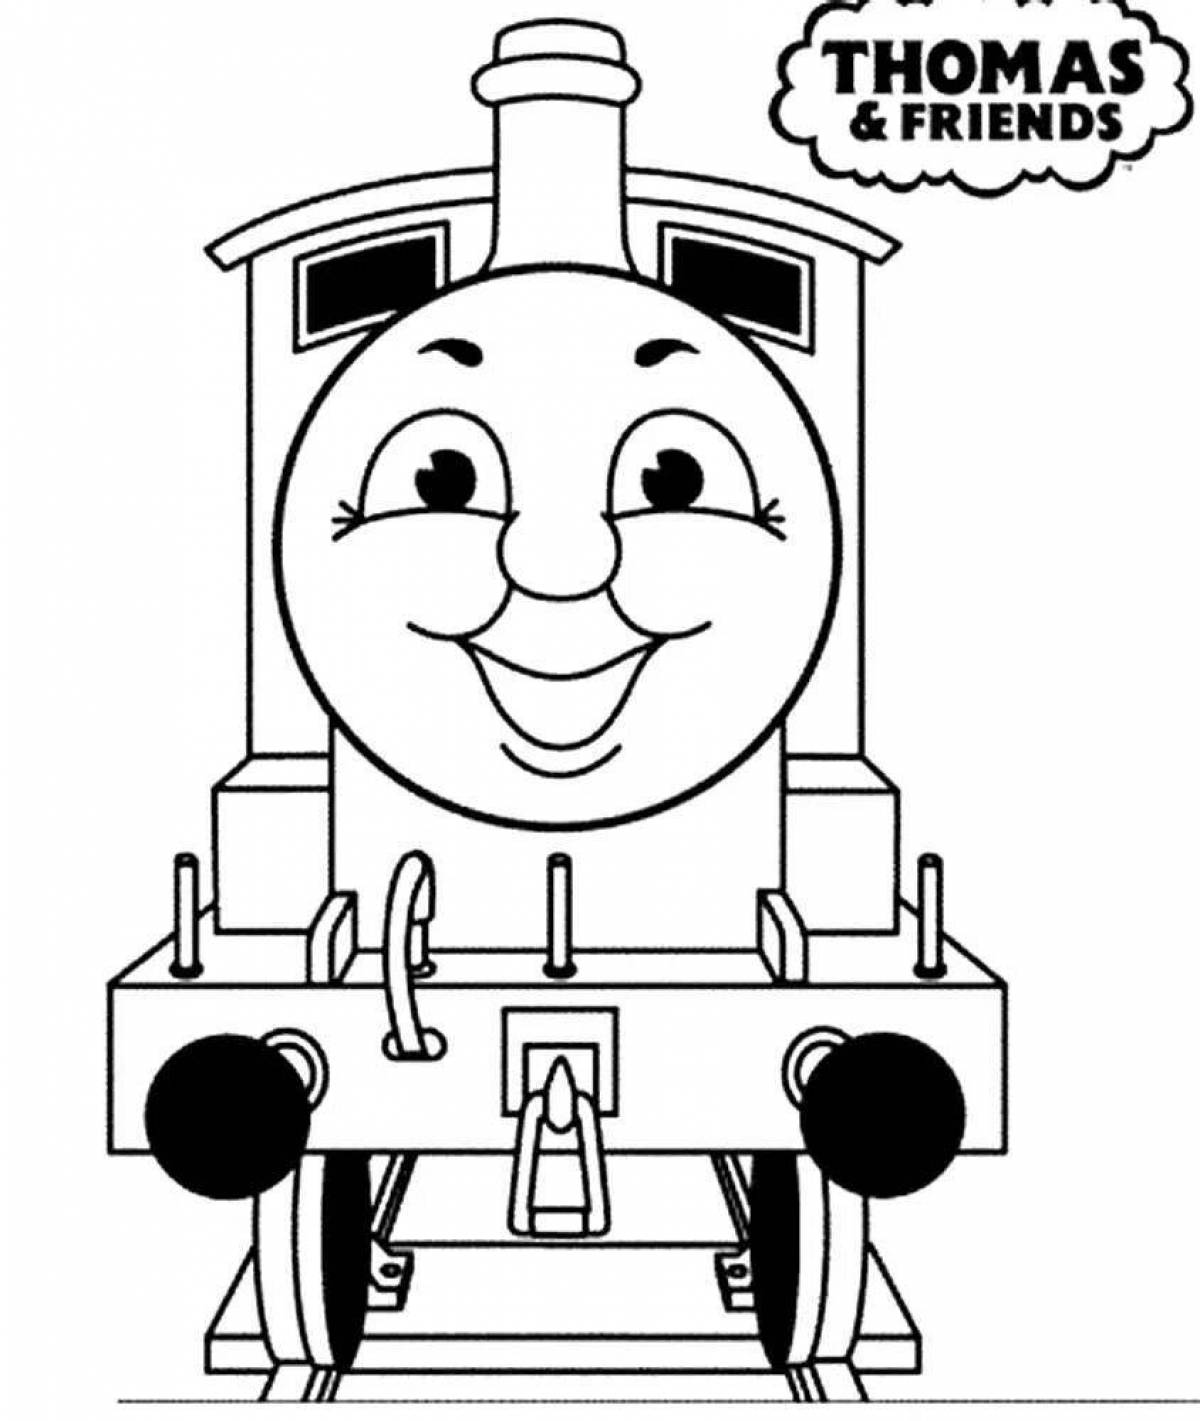 Thomas the Incredible Tank Engine: Scary Coloring Book